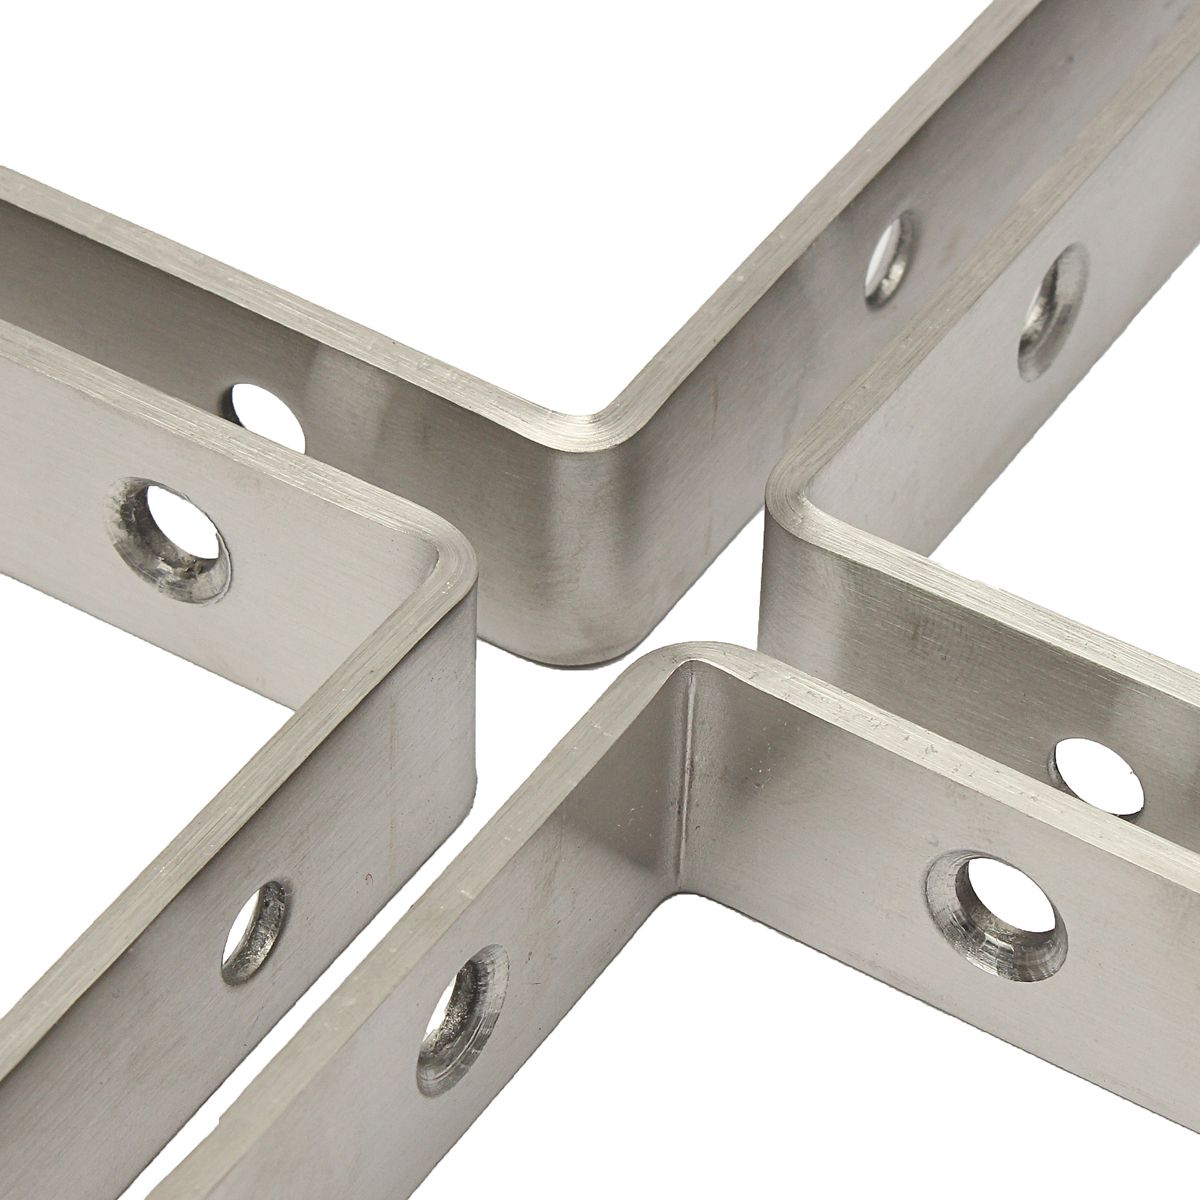 1-Pair-6-12-Inch-Stainless-Steel-Wall-Shelf-Mount-Brackets-L-Shaped-Right-Angle-Braces-1192592